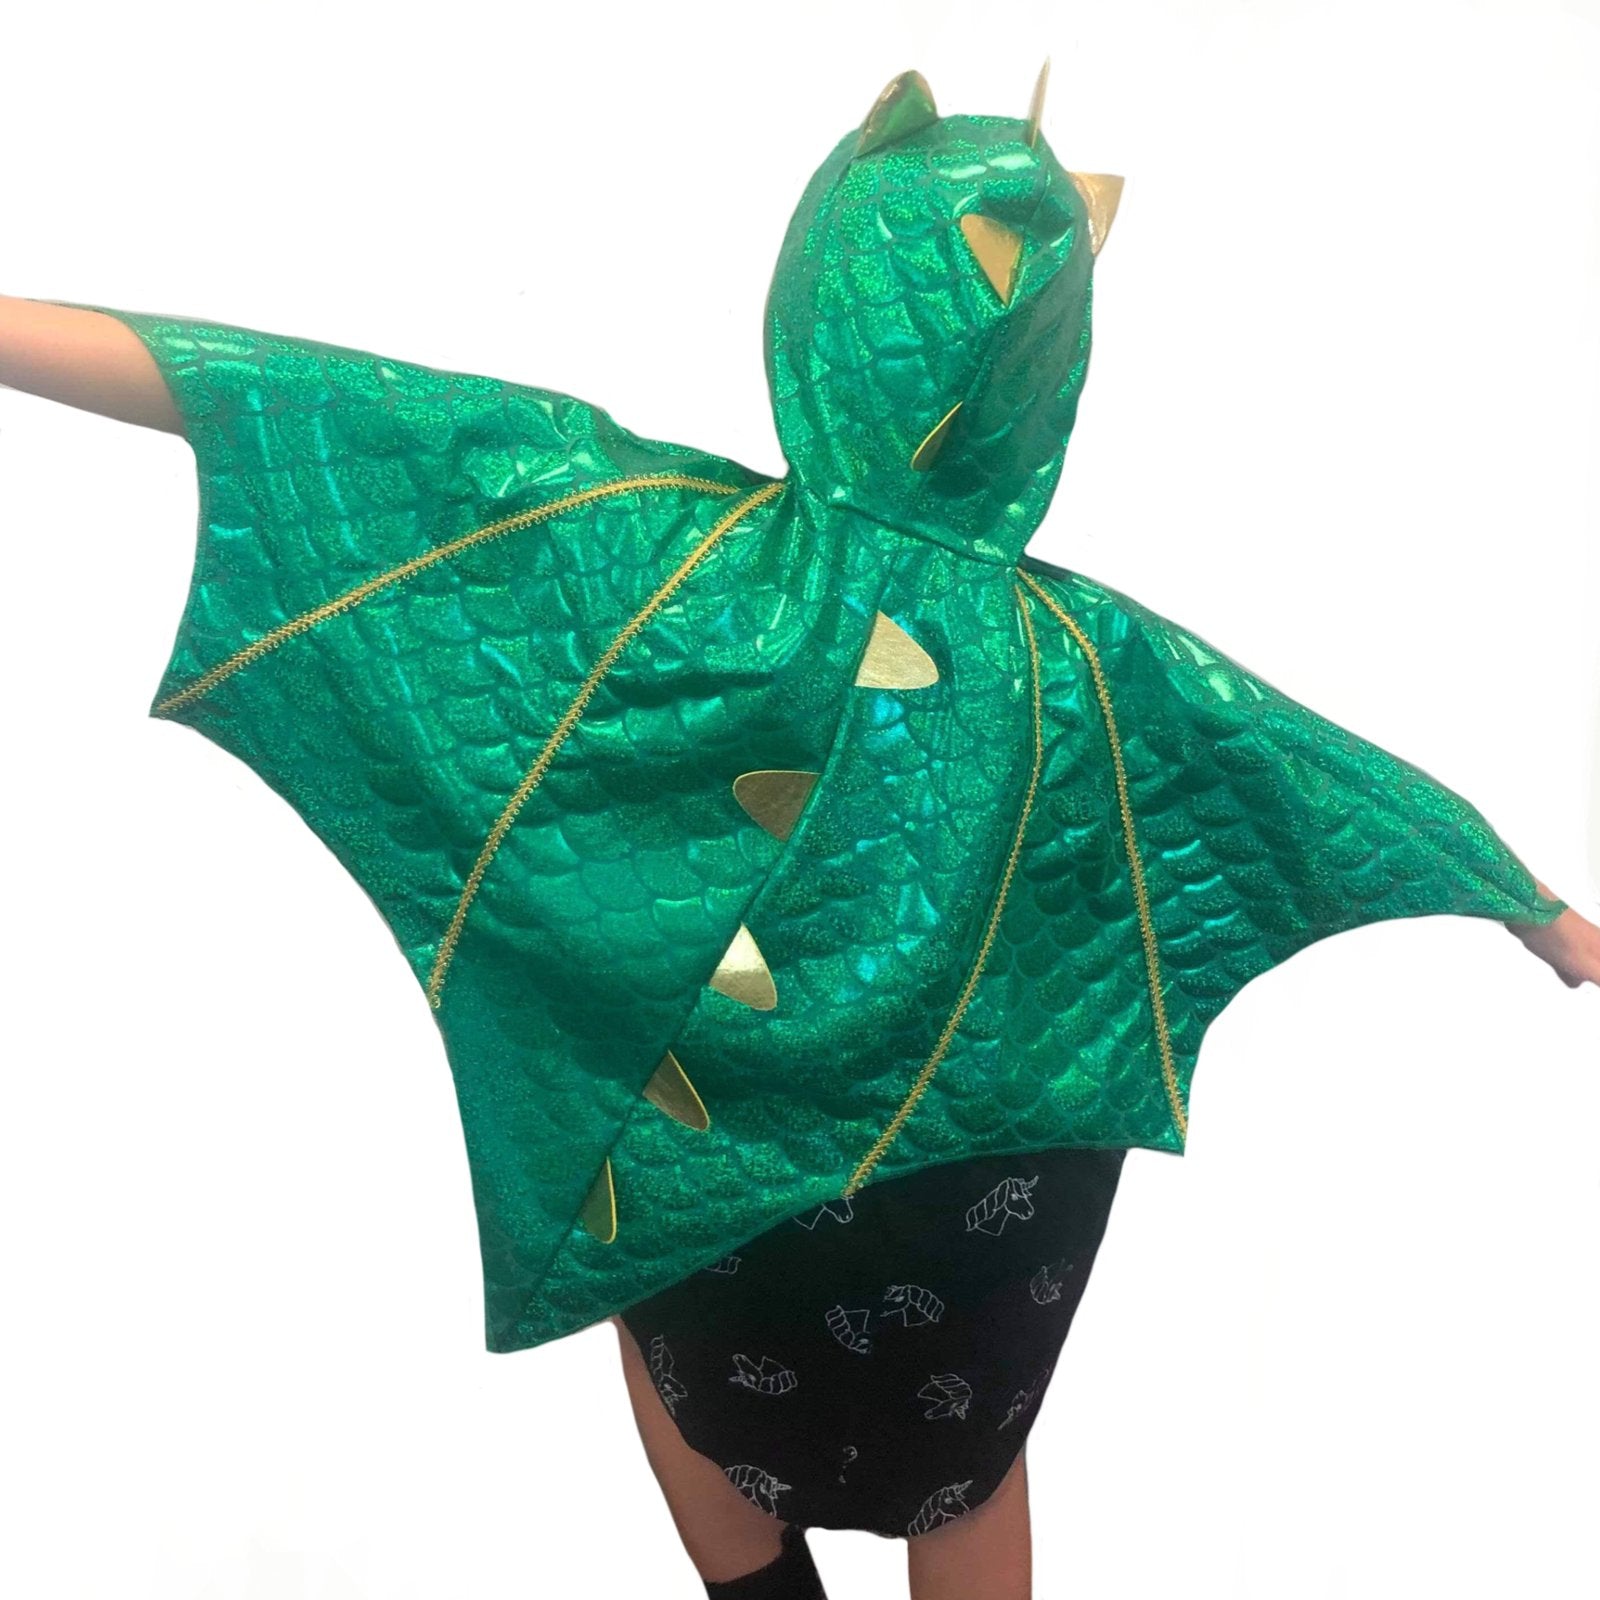 Costume Child Hooded Cape Dragon - Discontinued Line Last Chance To Buy